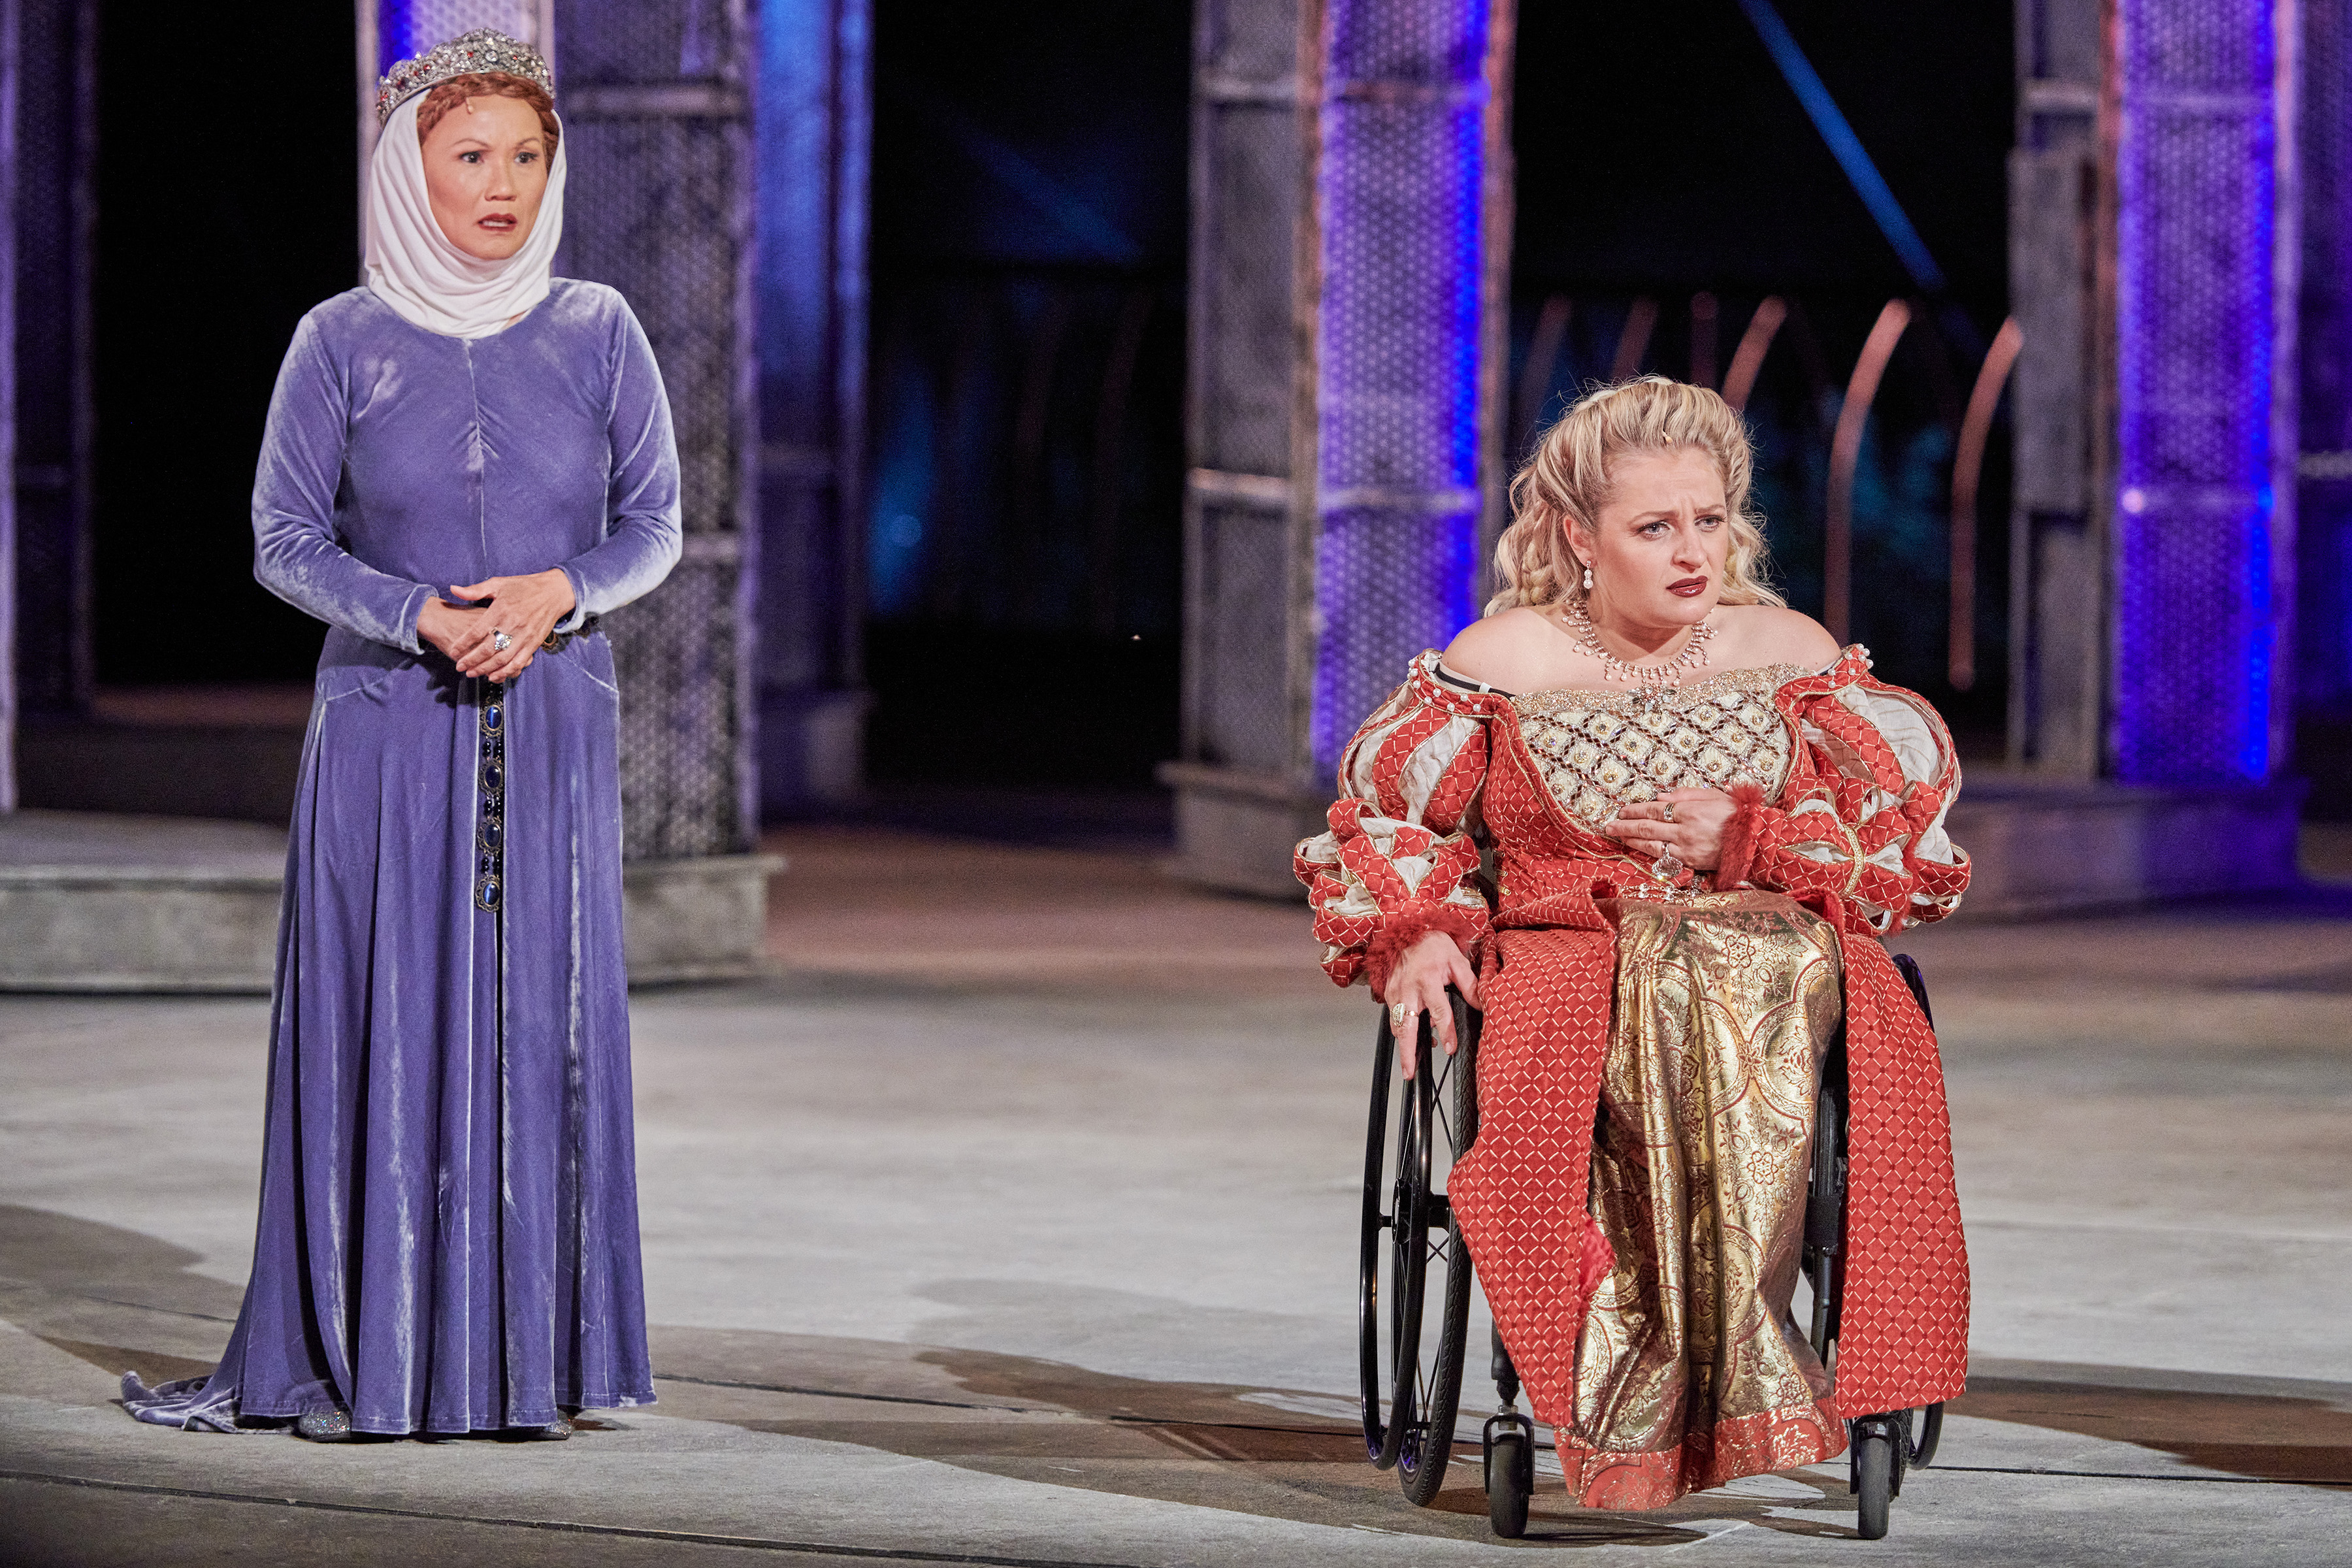 Monique Holt as the Duchess of York and Ali Stroker as Queen Anne in Great Performances' Richard III.